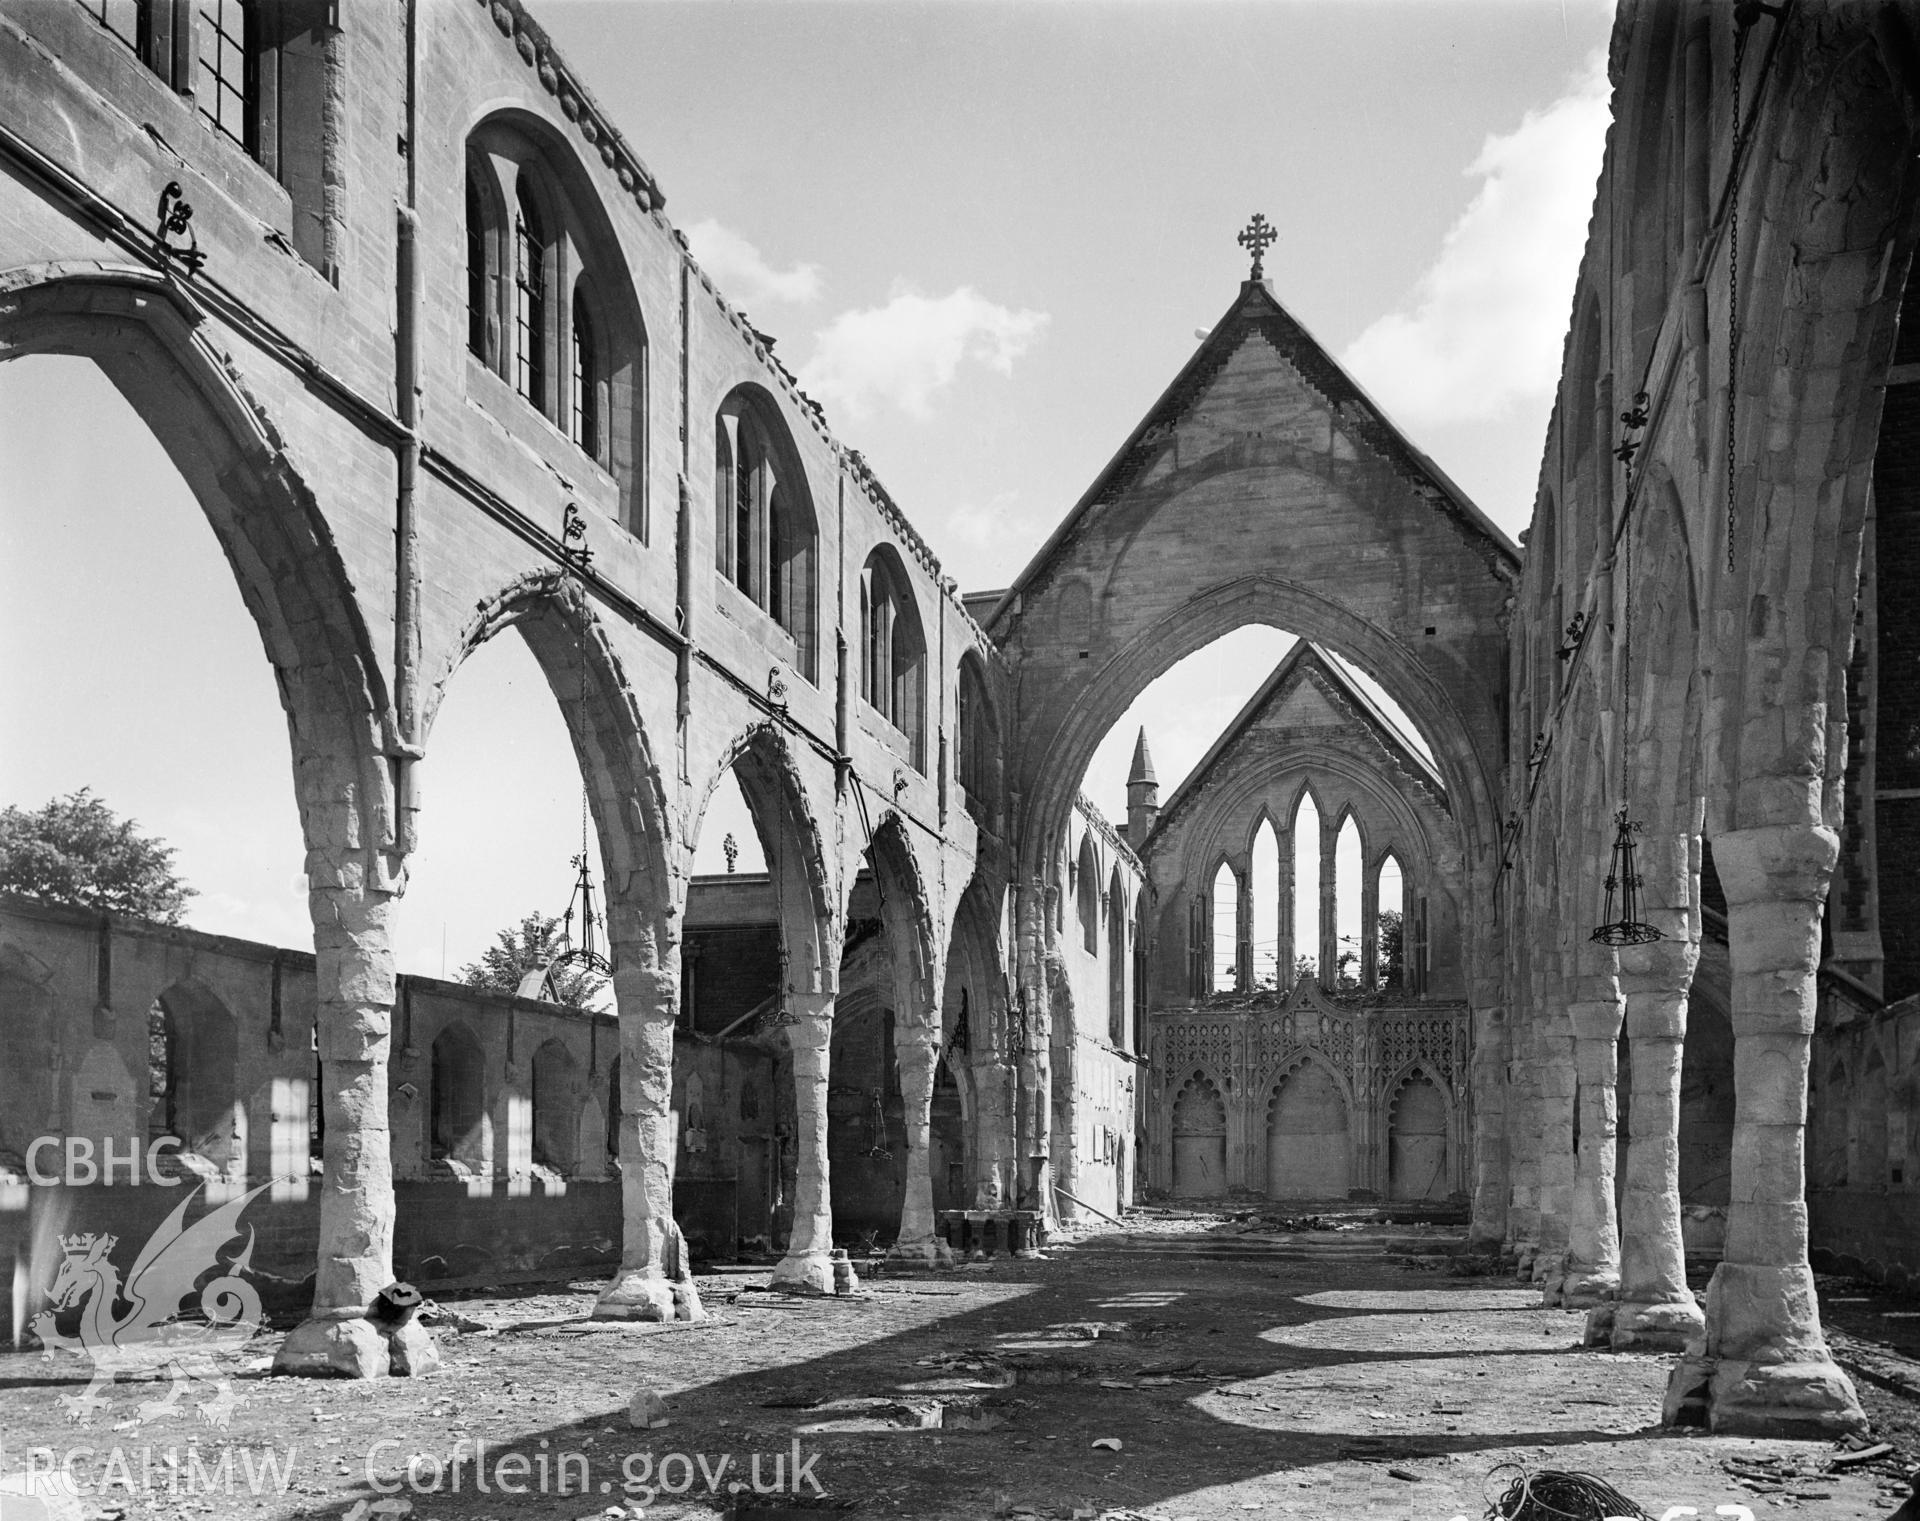 Interior view looking east, showing damage to the church caused by enemy action